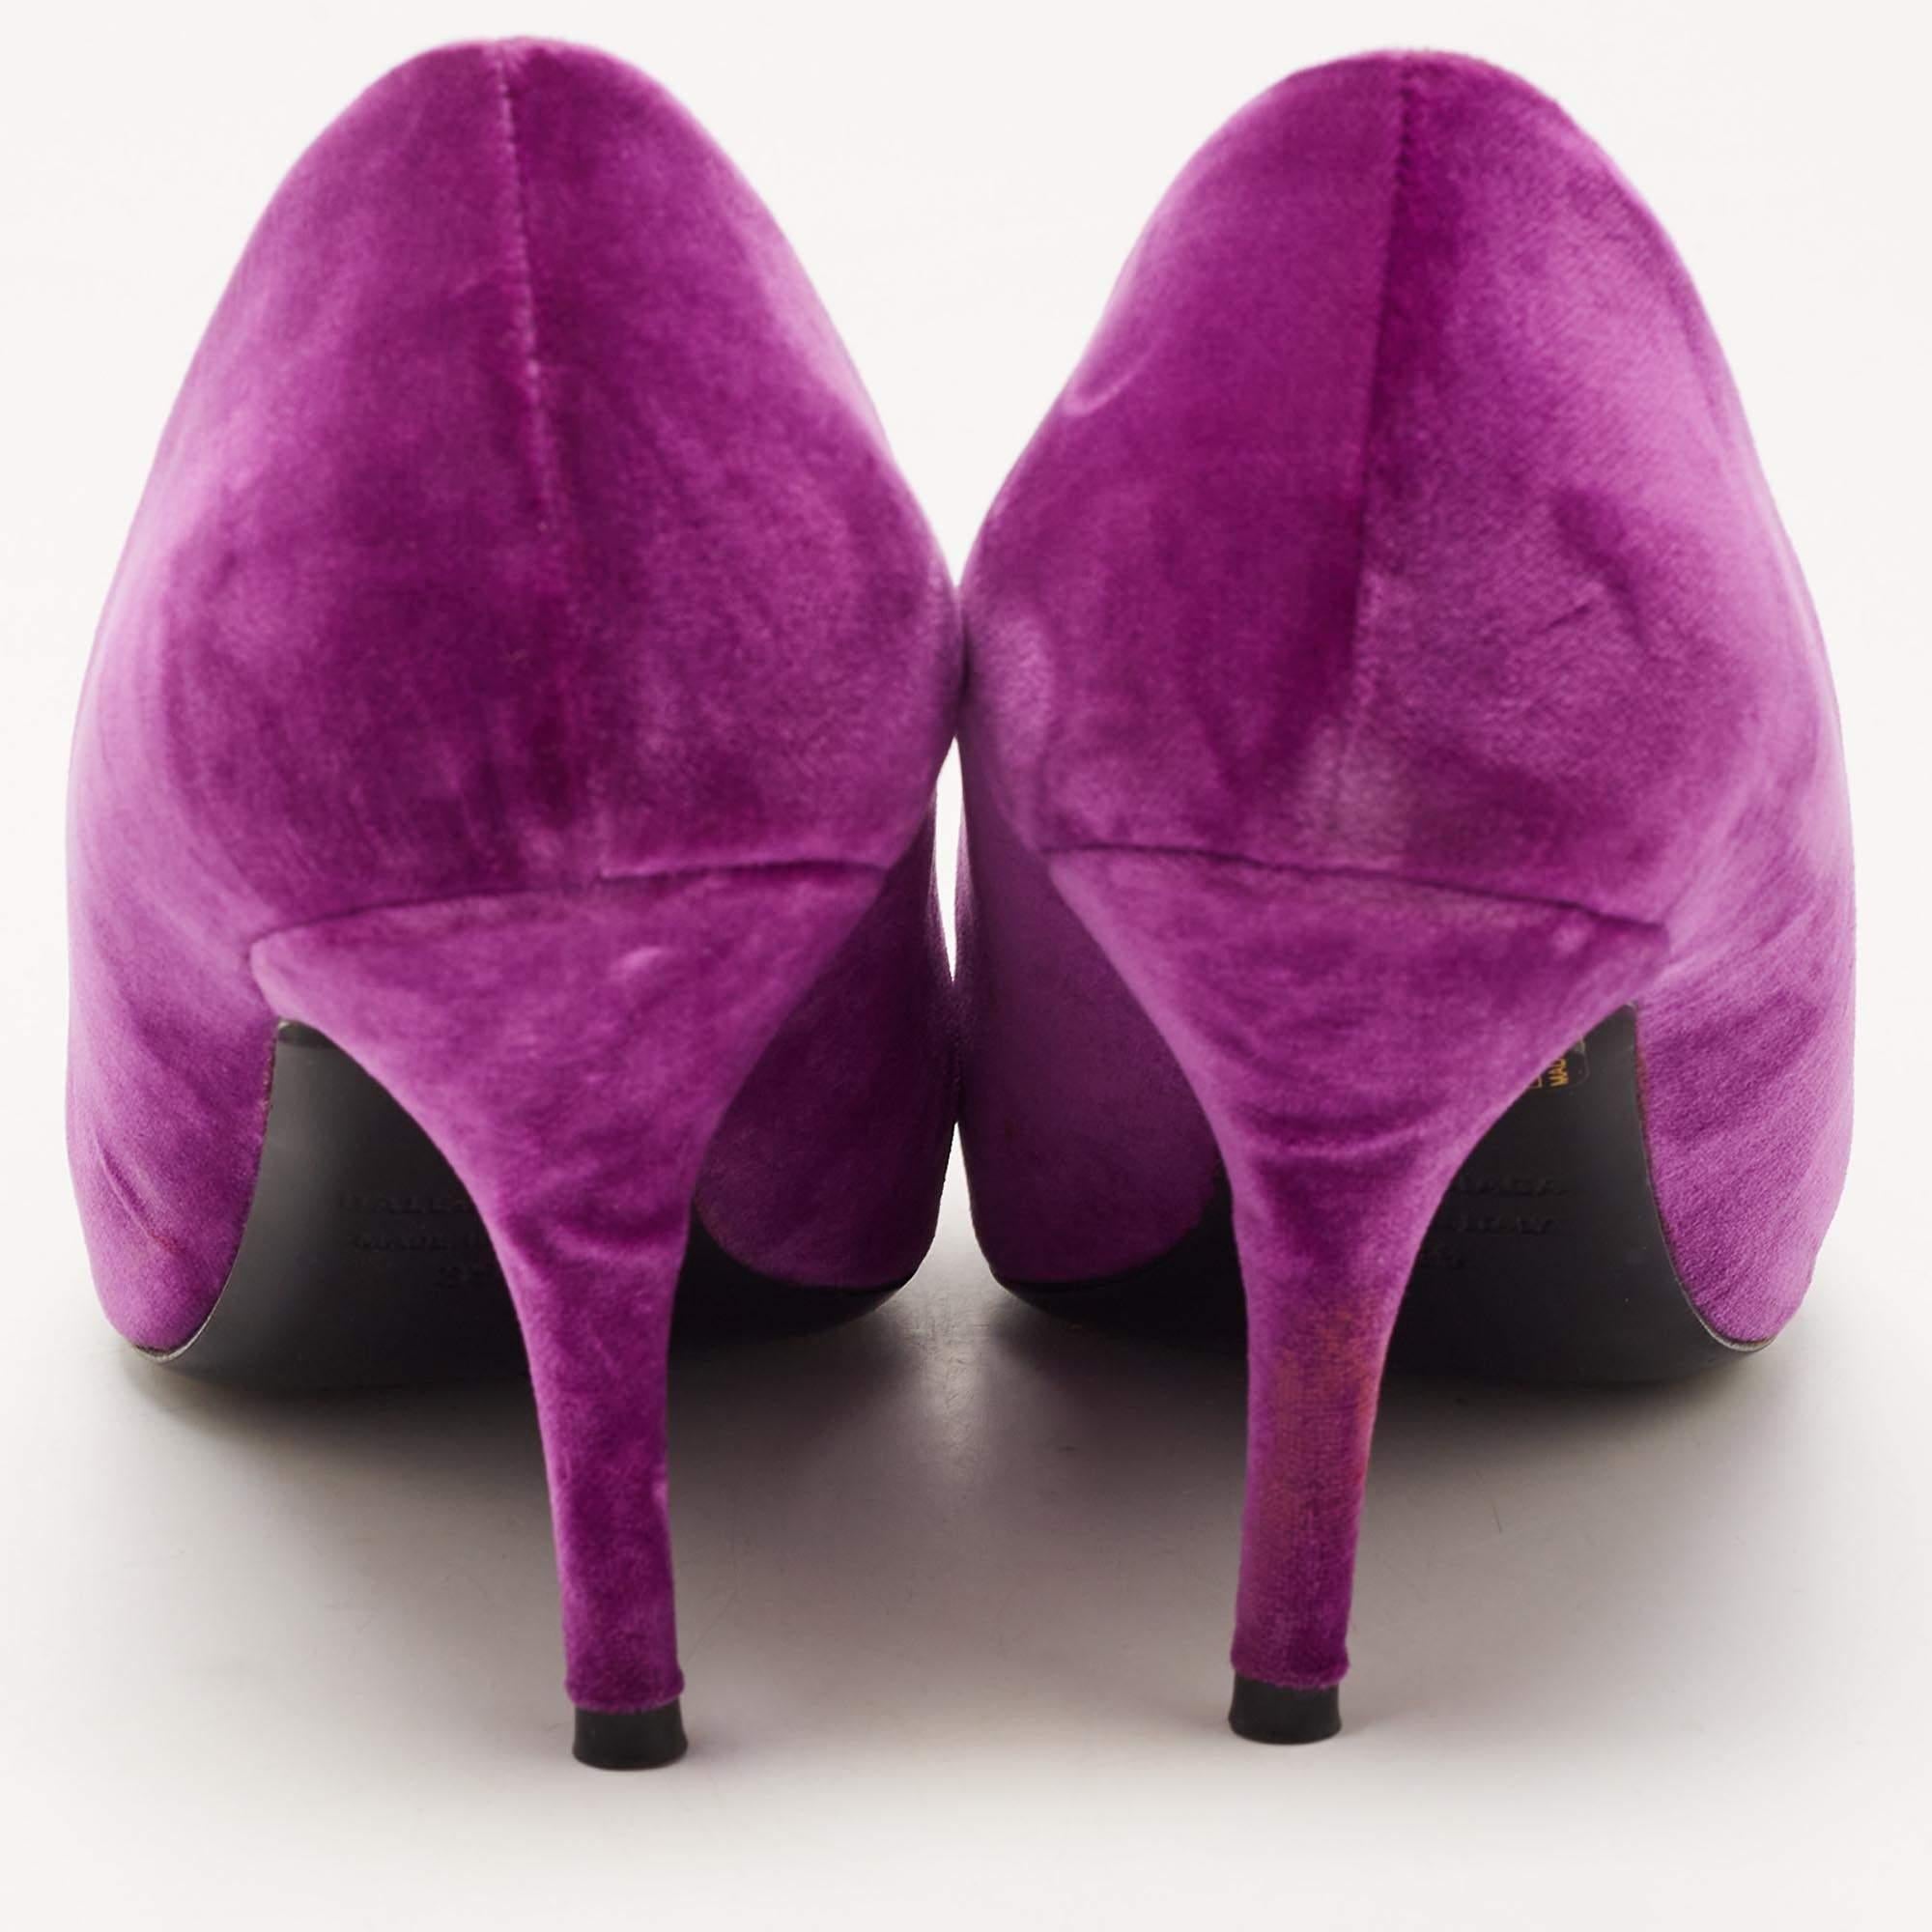 Flaunt high style with every step, and fetch admiring gasps your way every time you step out wearing these pumps from Balenciaga. The pumps carry a purple velvet exterior and they are made whole with pointed toes, gold-tone BB motif on the vamps and